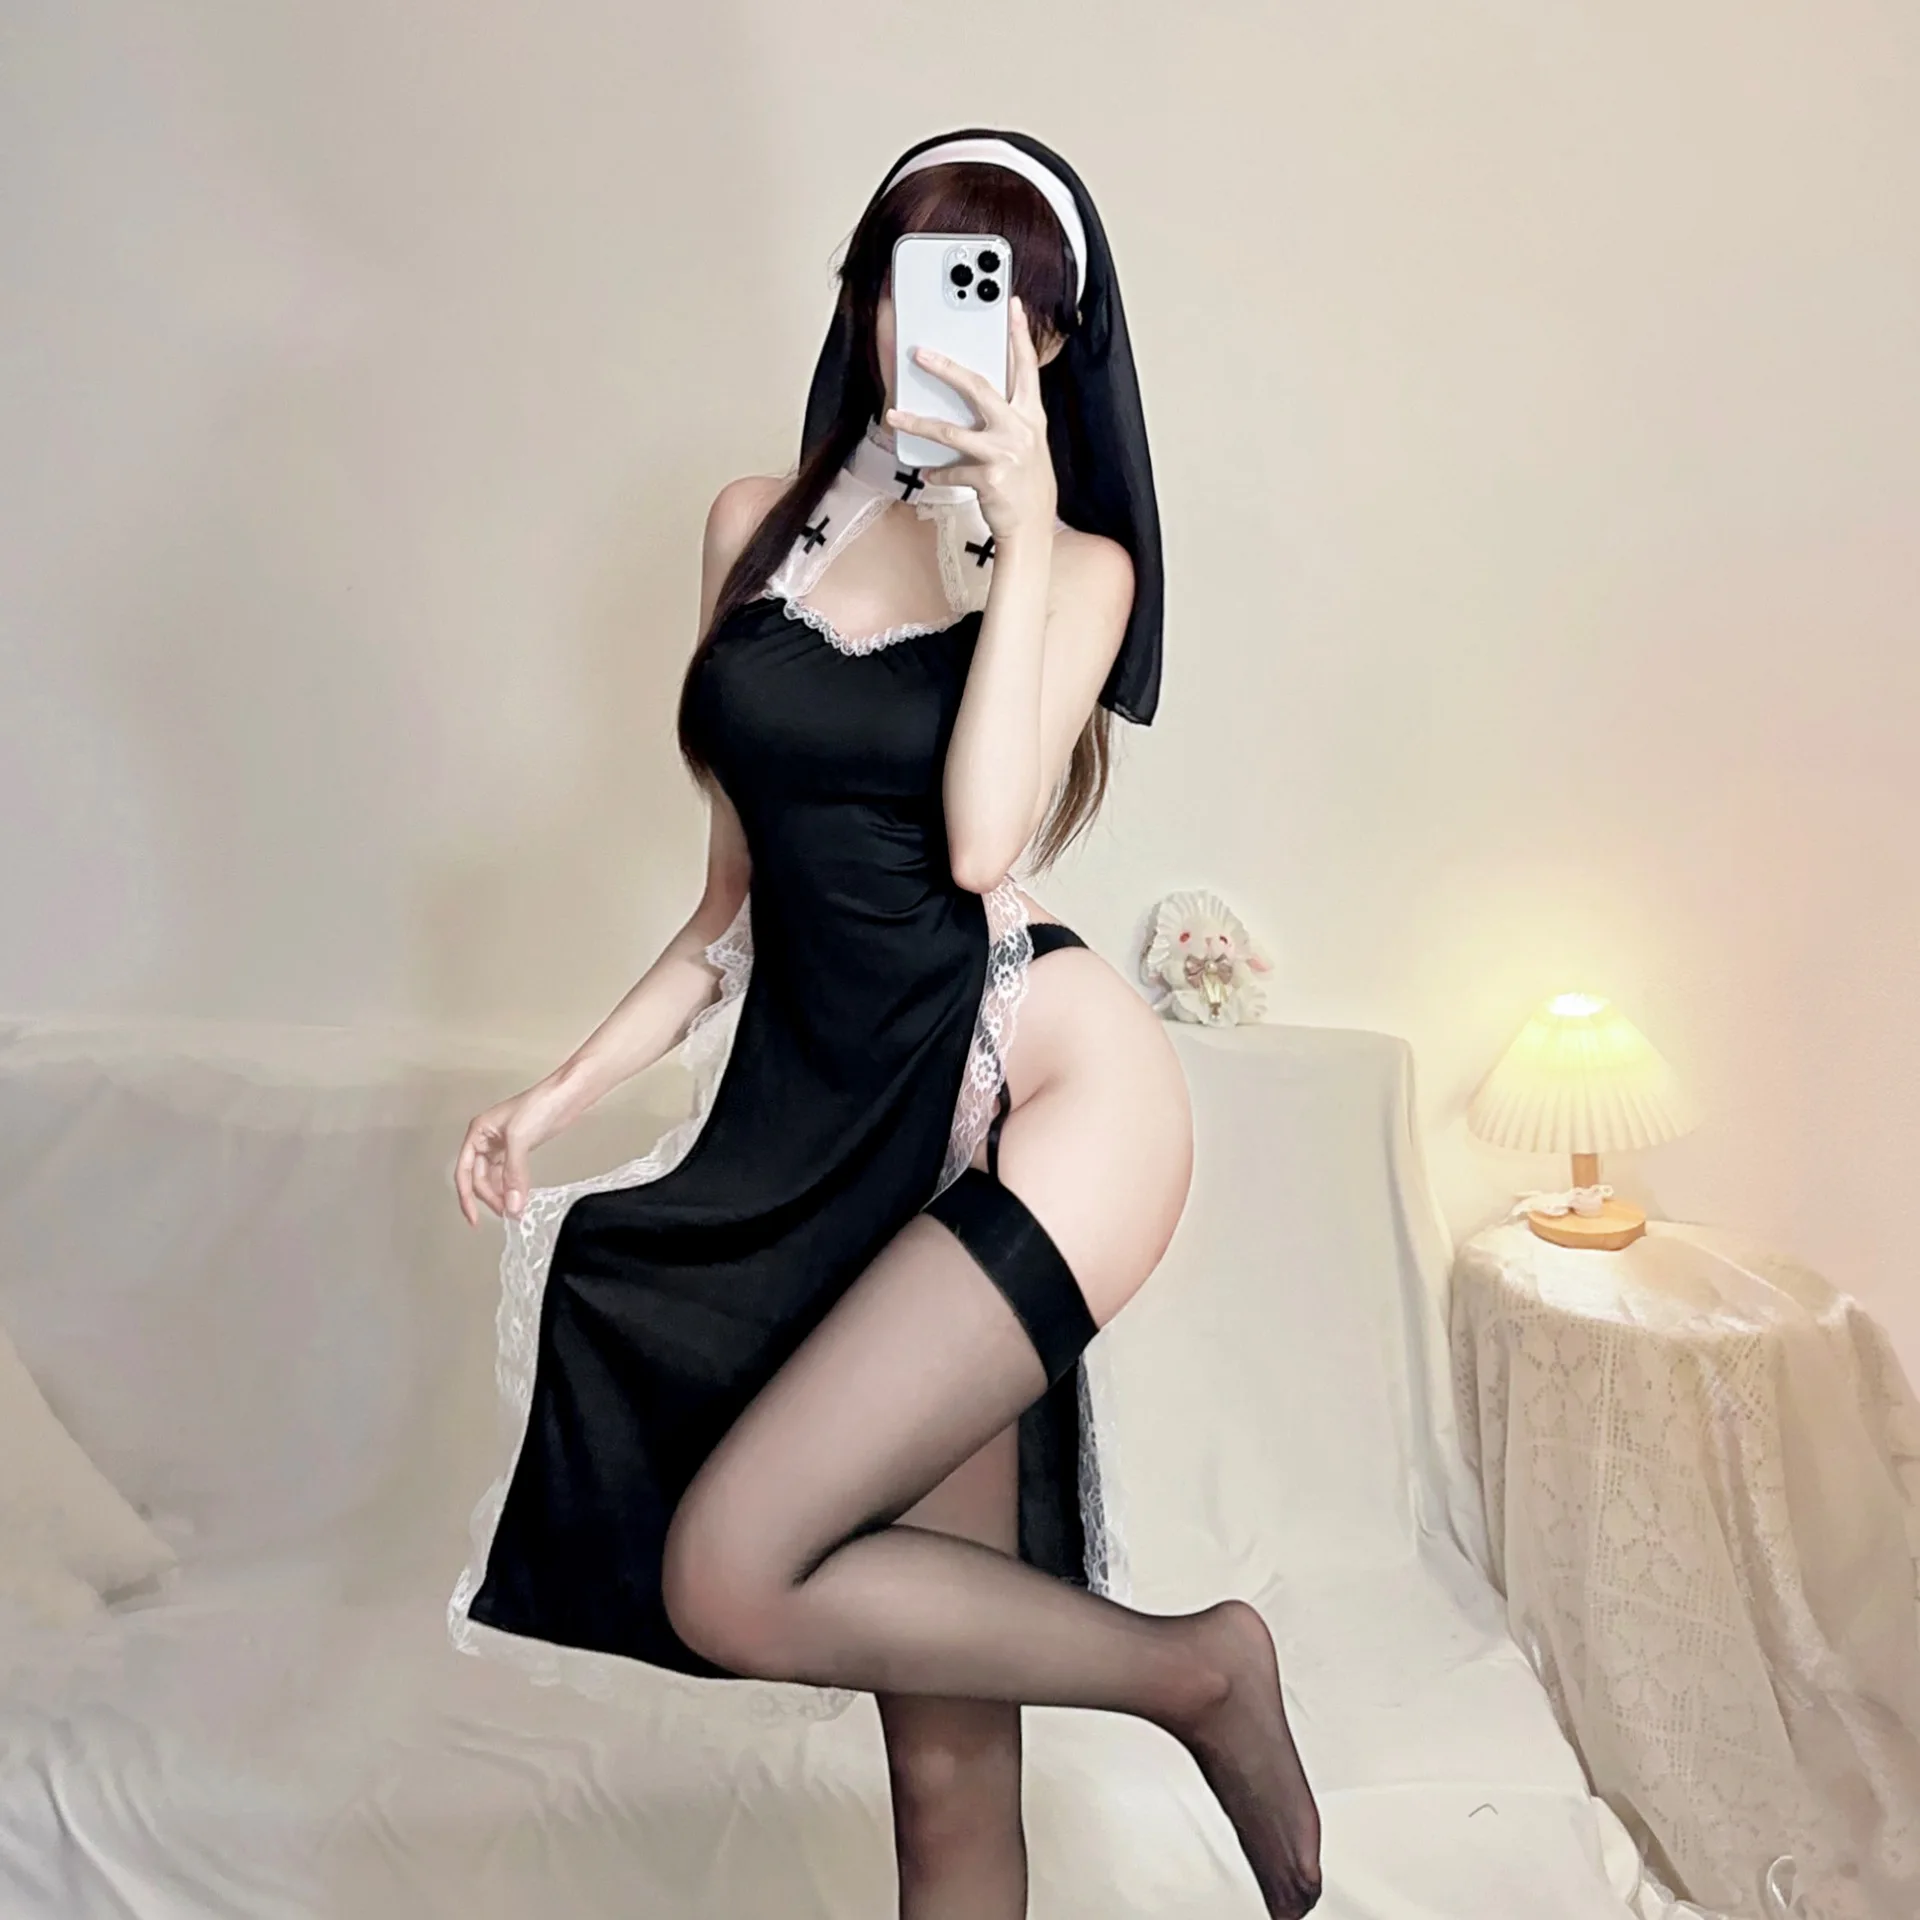 

Porno Crotchless Underwear Women French Apron Maid Dress Halloween Erotic Costumes Cosplay Lolita Uniform Sexy Lingerie Outfit